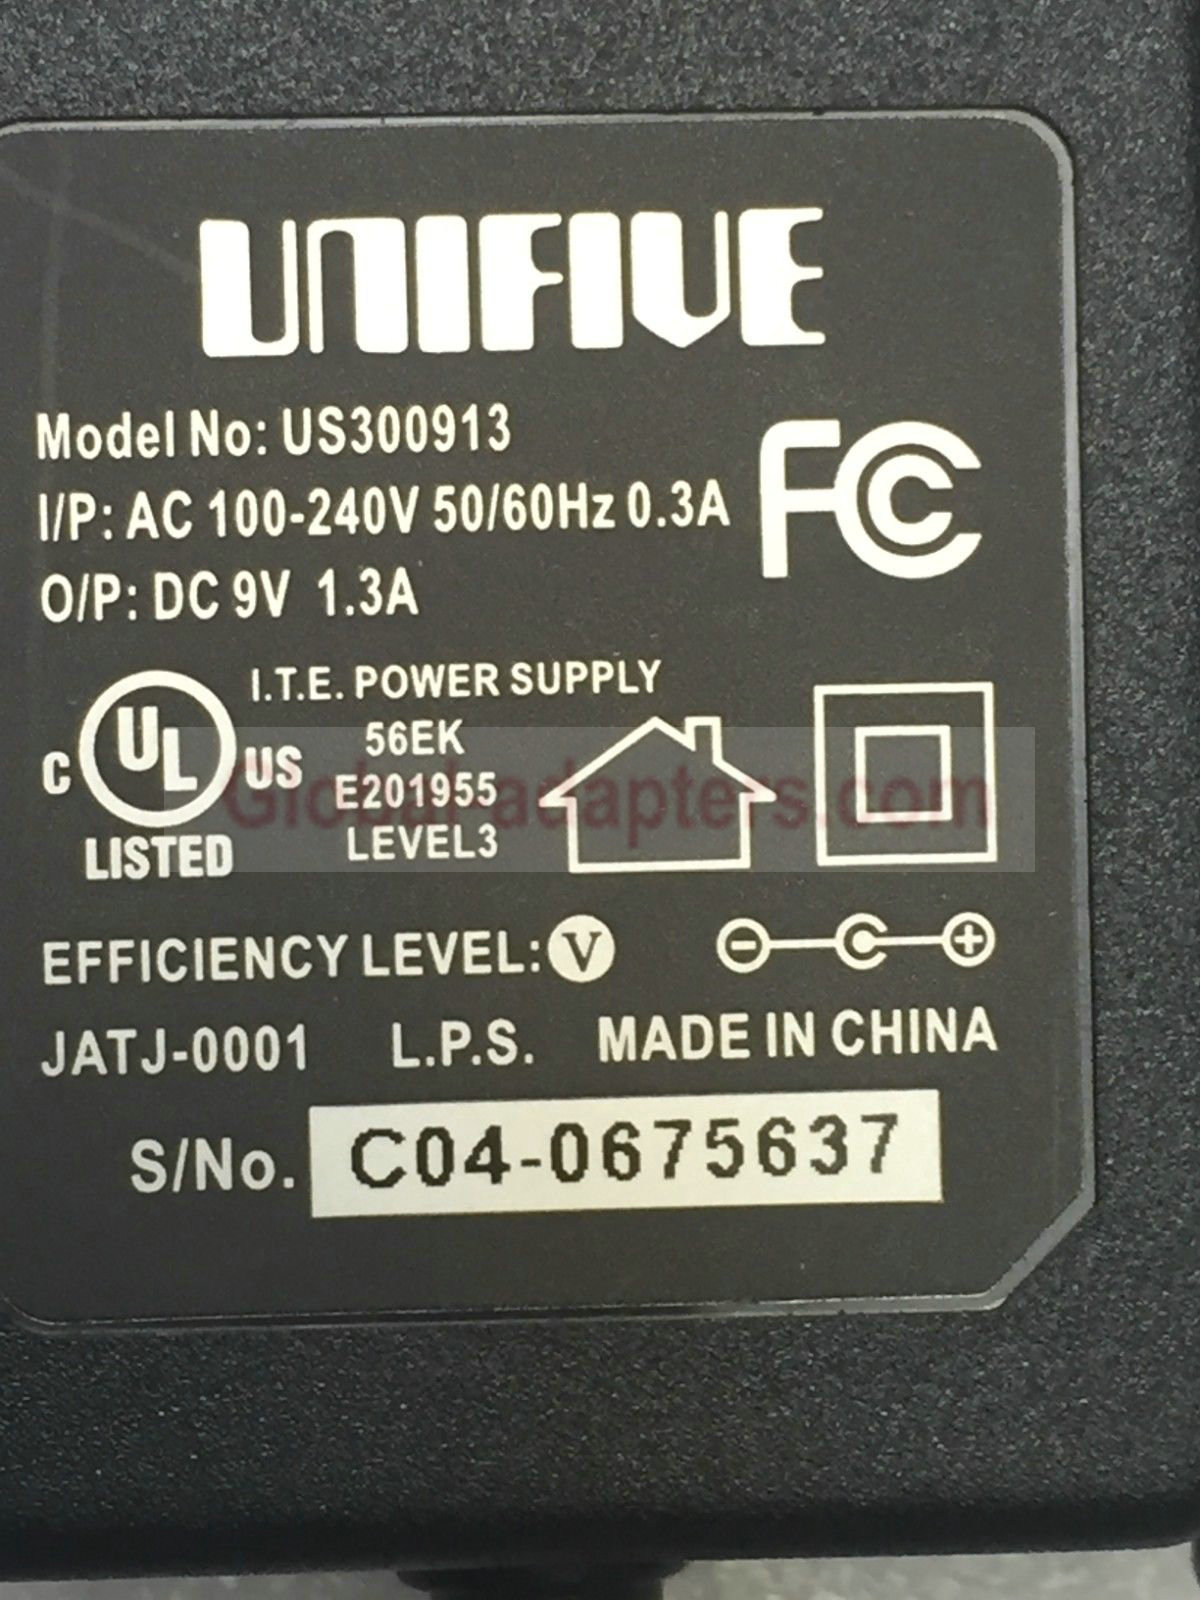 NEW 9V 1.3A ac adaptor for Unifive US300913 power supply